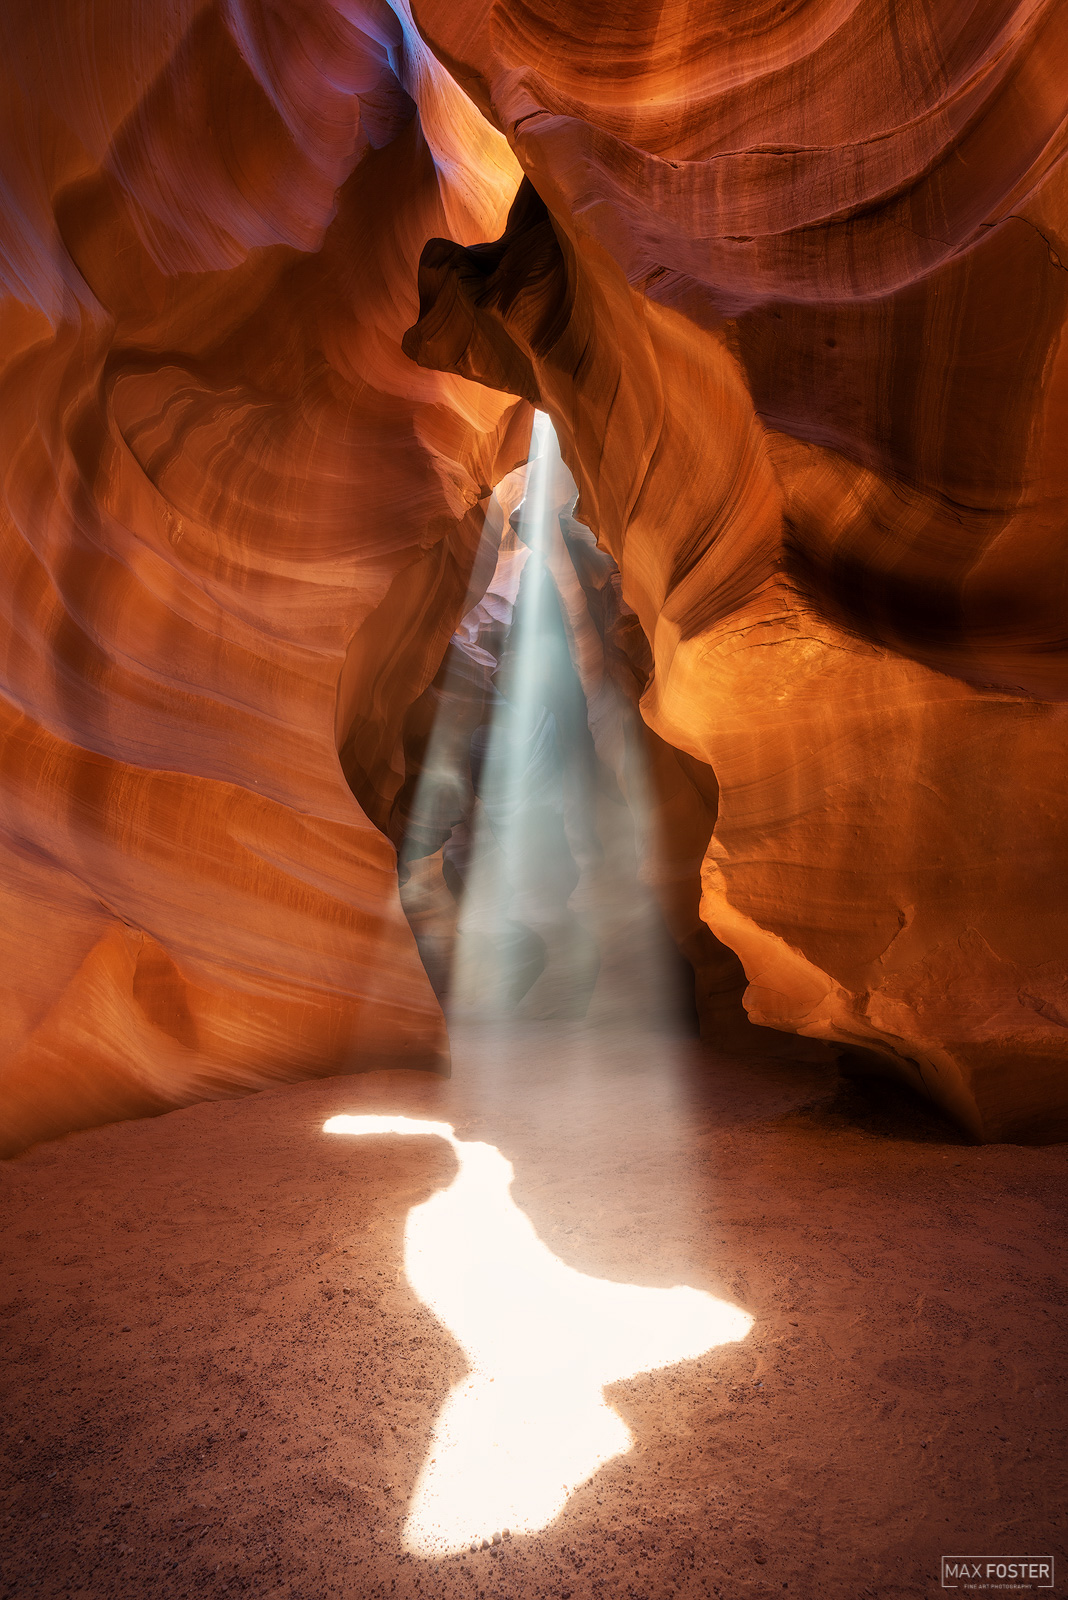 Refresh your space with Spirit Animal, Max Foster's limited edition photography print of Antelope Canyon in Page, Arizona from...